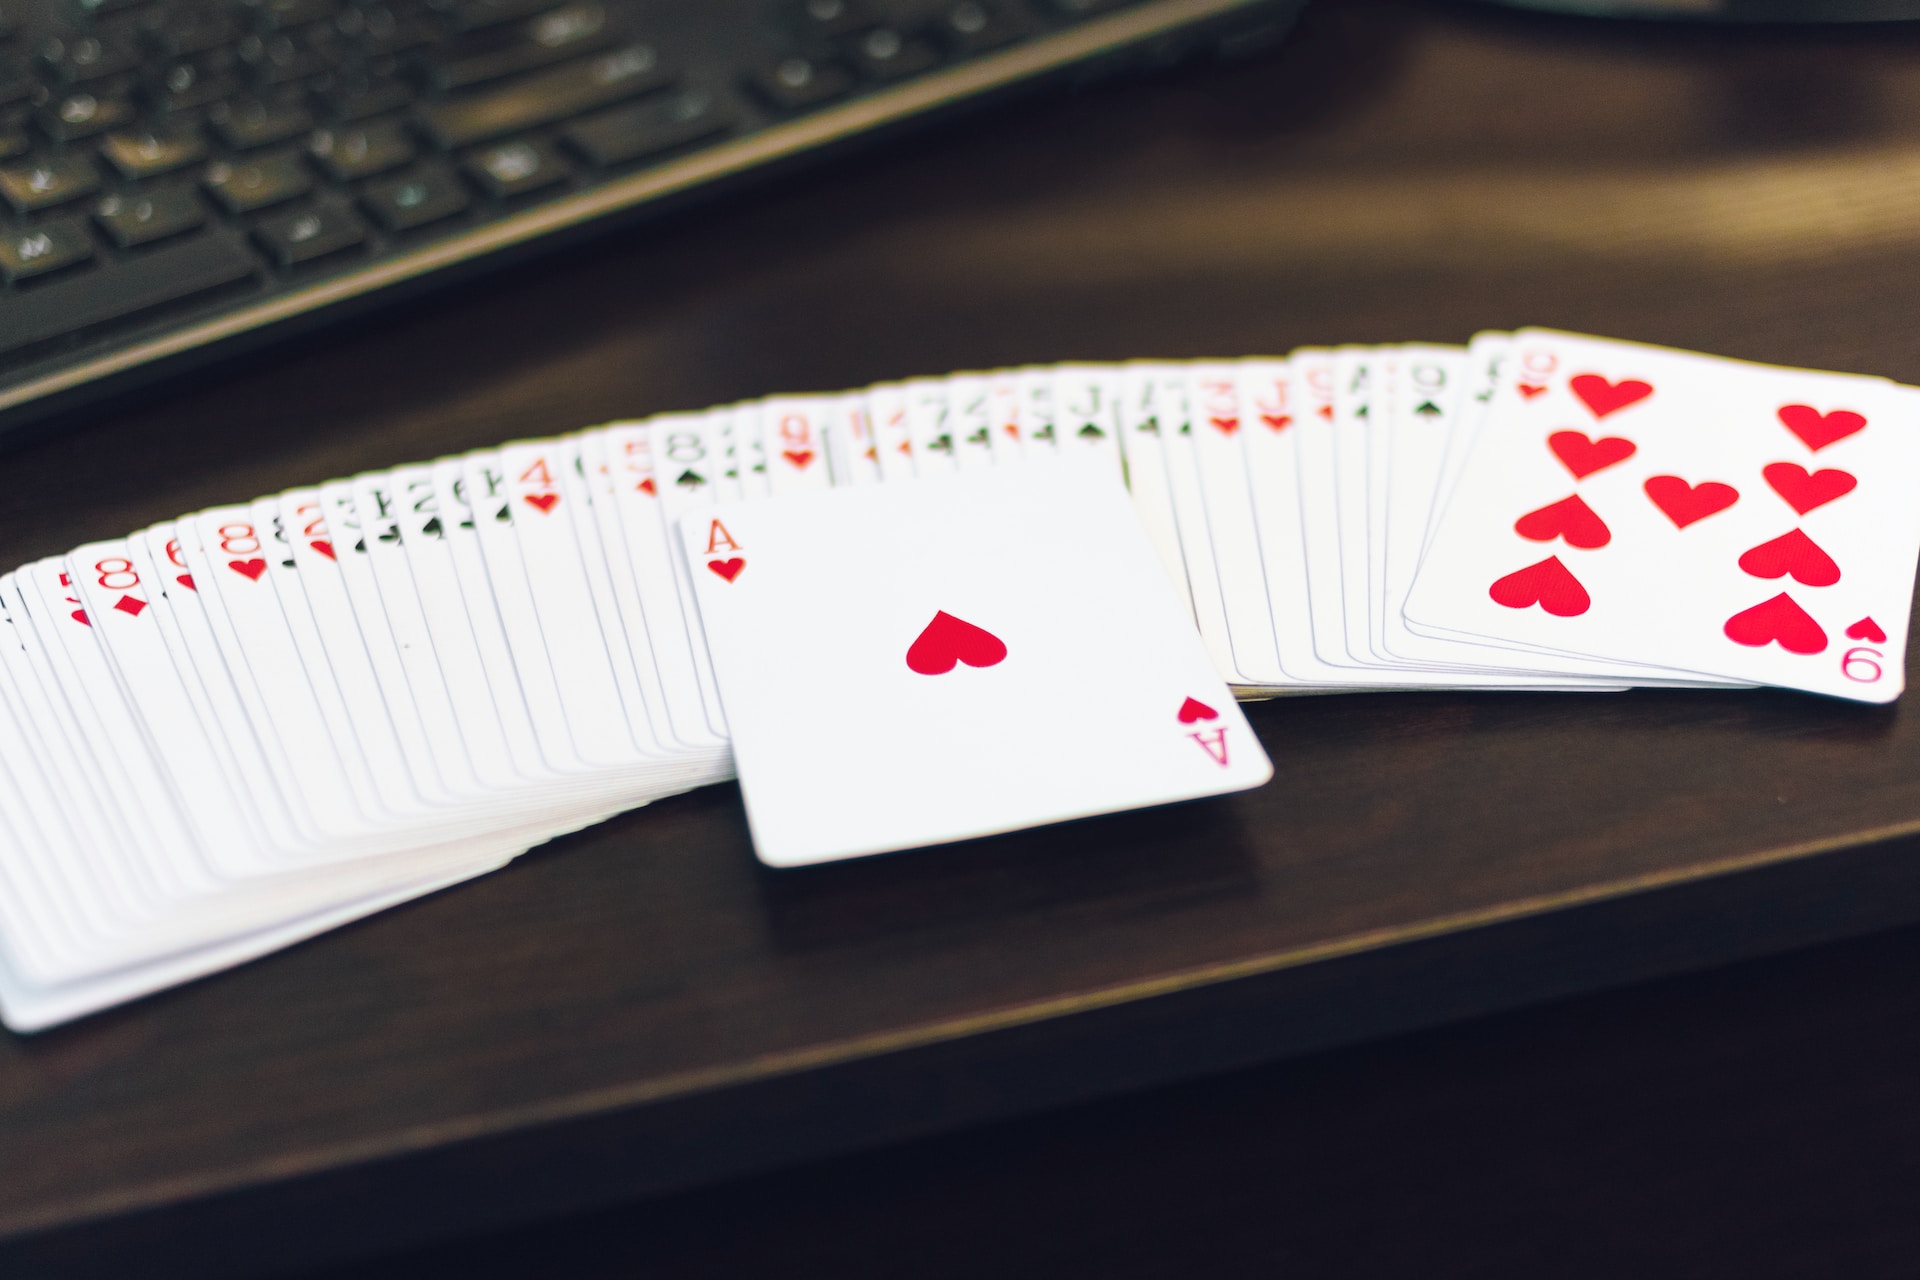 How To Play Online Poker To Win Money At Online Casinos